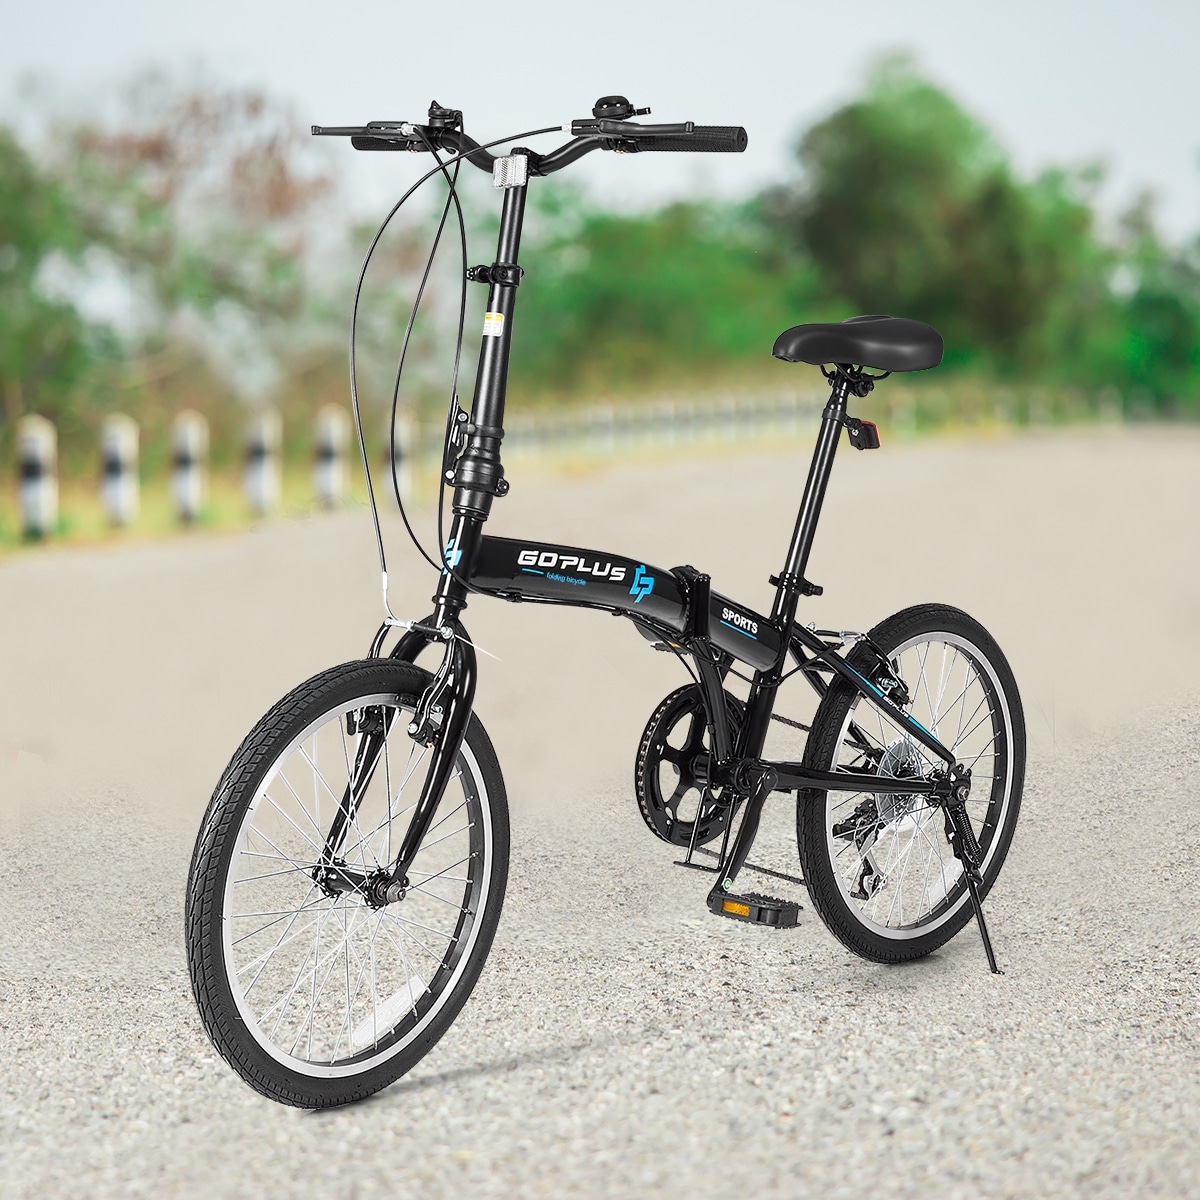 7 Speed Shimano Gears Foldable Compact Bicycle with Anti-Skid and Wear-Resistant Tire for Adults Lightweight Iron Frame Goplus 20 Folding Bike